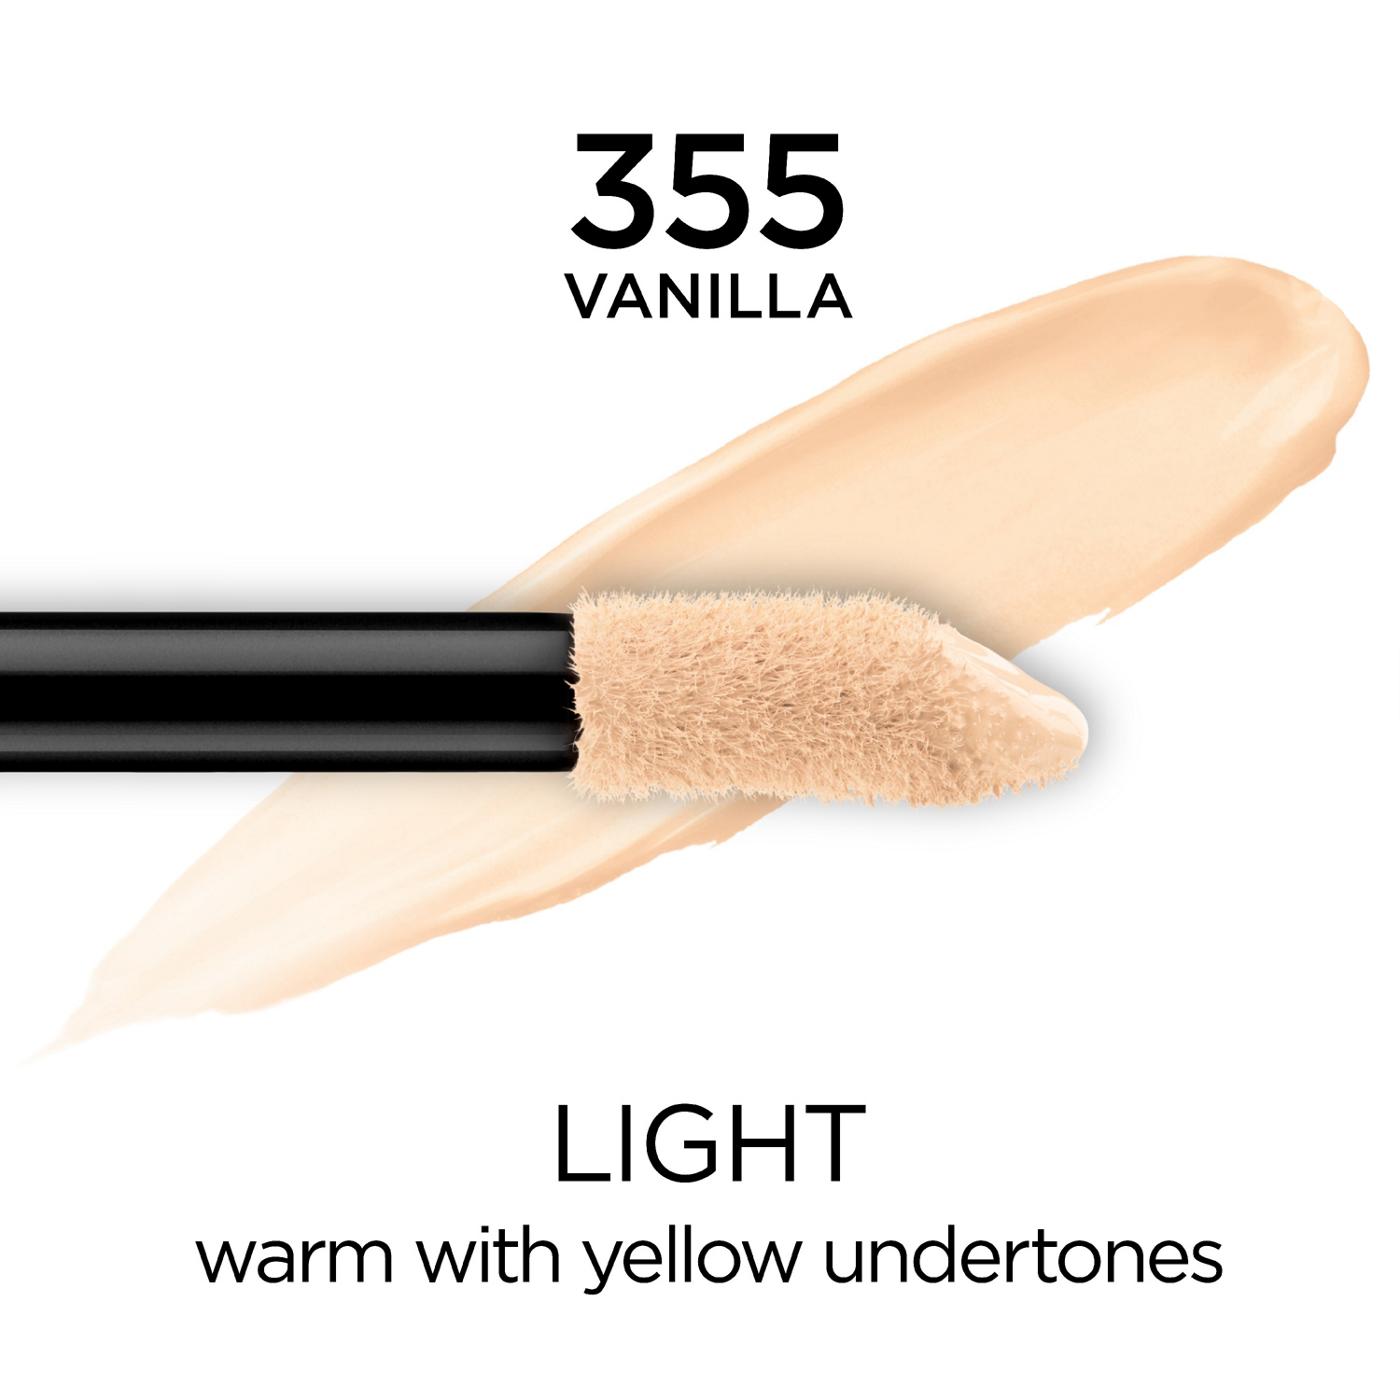 L'Oréal Paris Infallible Full Wear Concealer up to 24H Full Coverage Vanilla; image 6 of 7